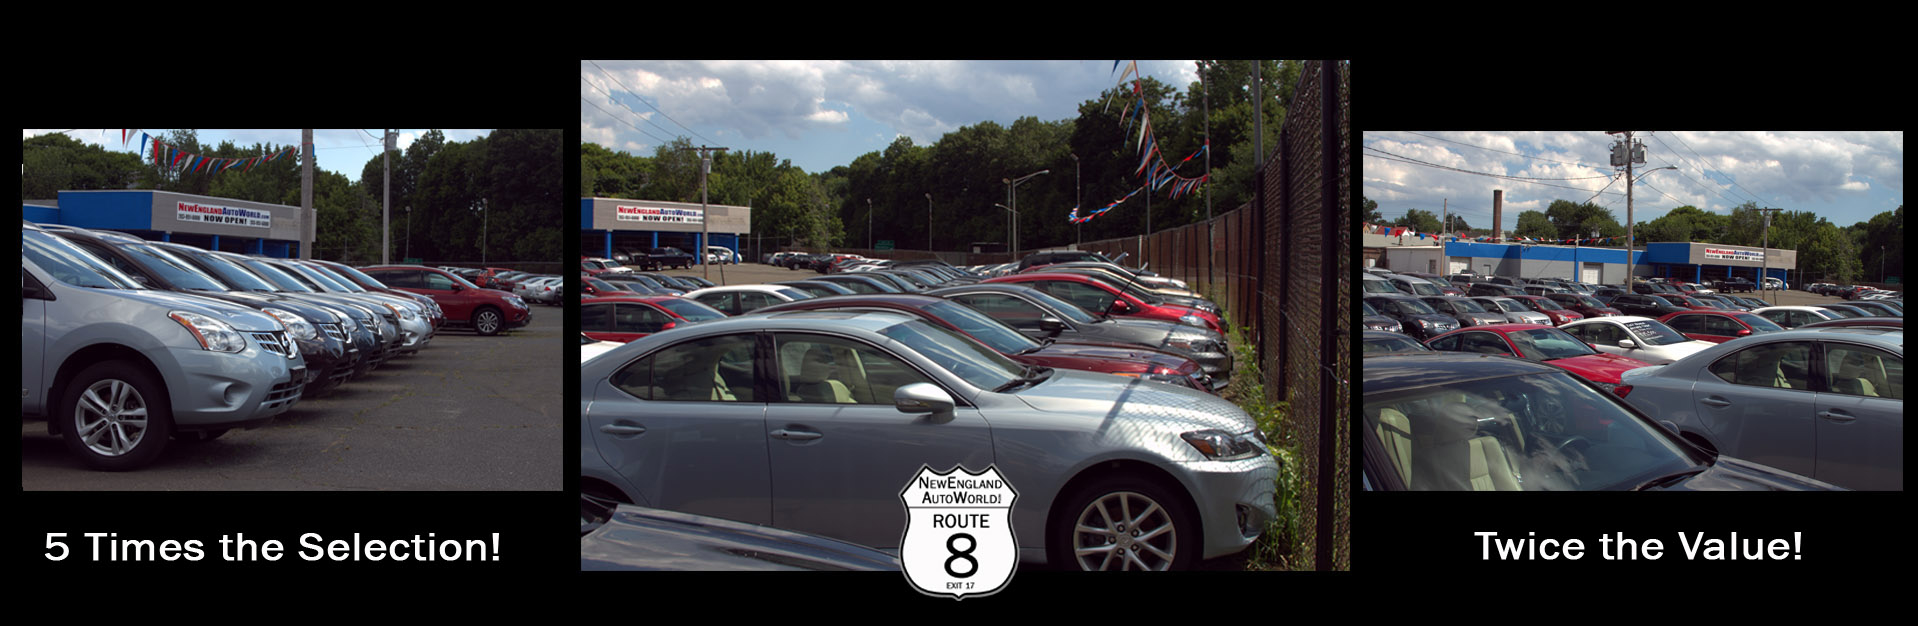 New England Auto World offers over 300 cars to choose from, We have cars that will fit any needs and budget.